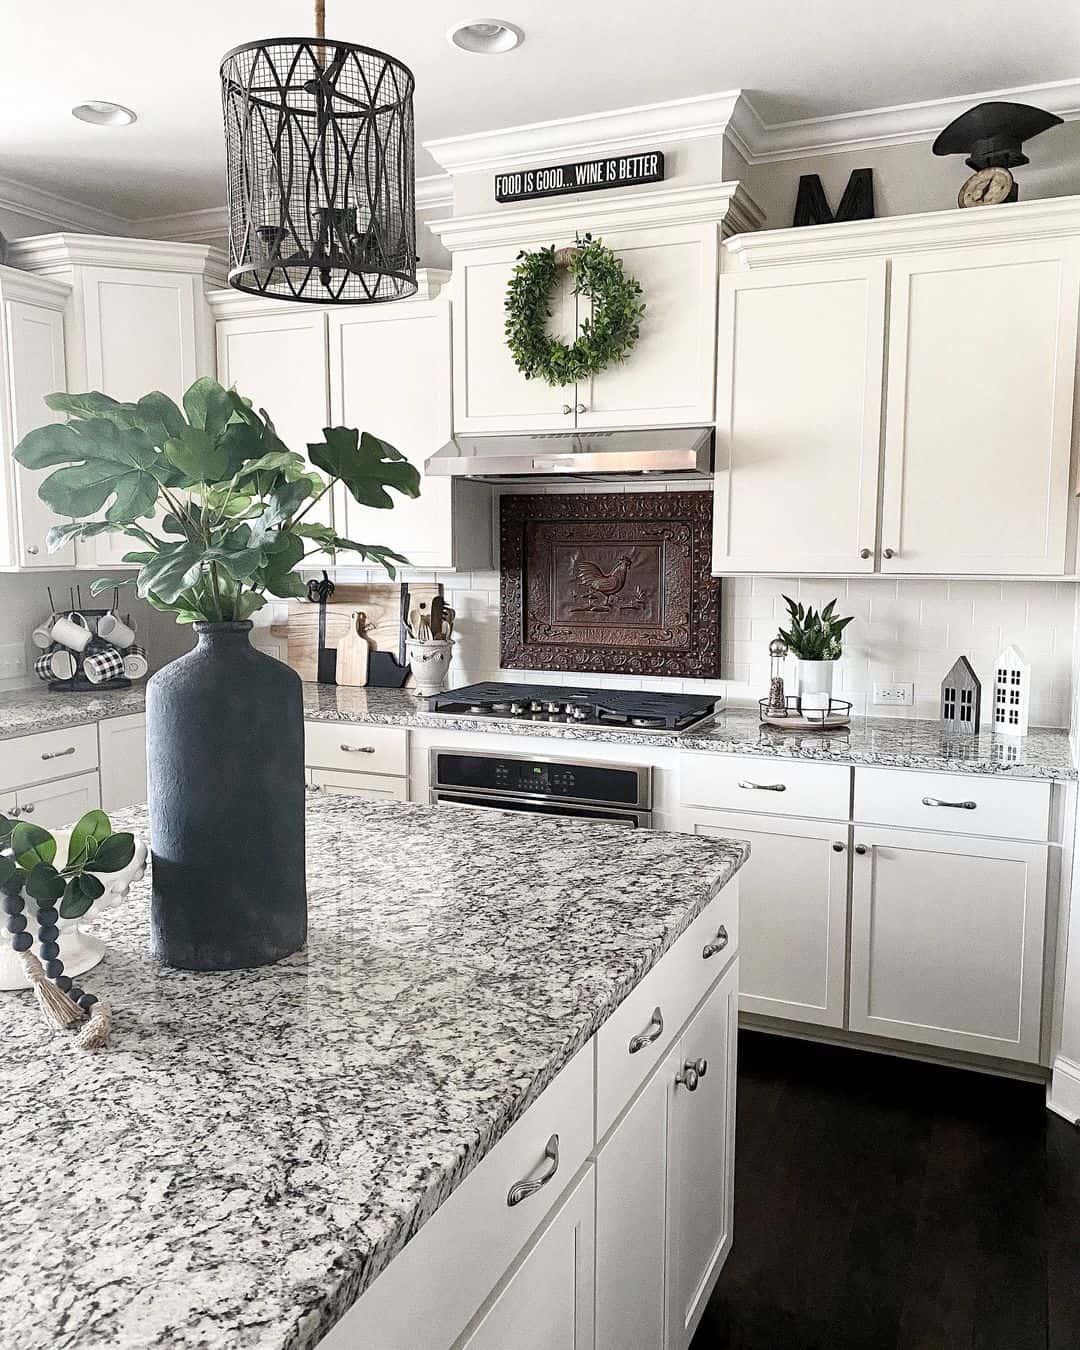 Marble-Inspired Elegance for the Farmhouse Kitchen